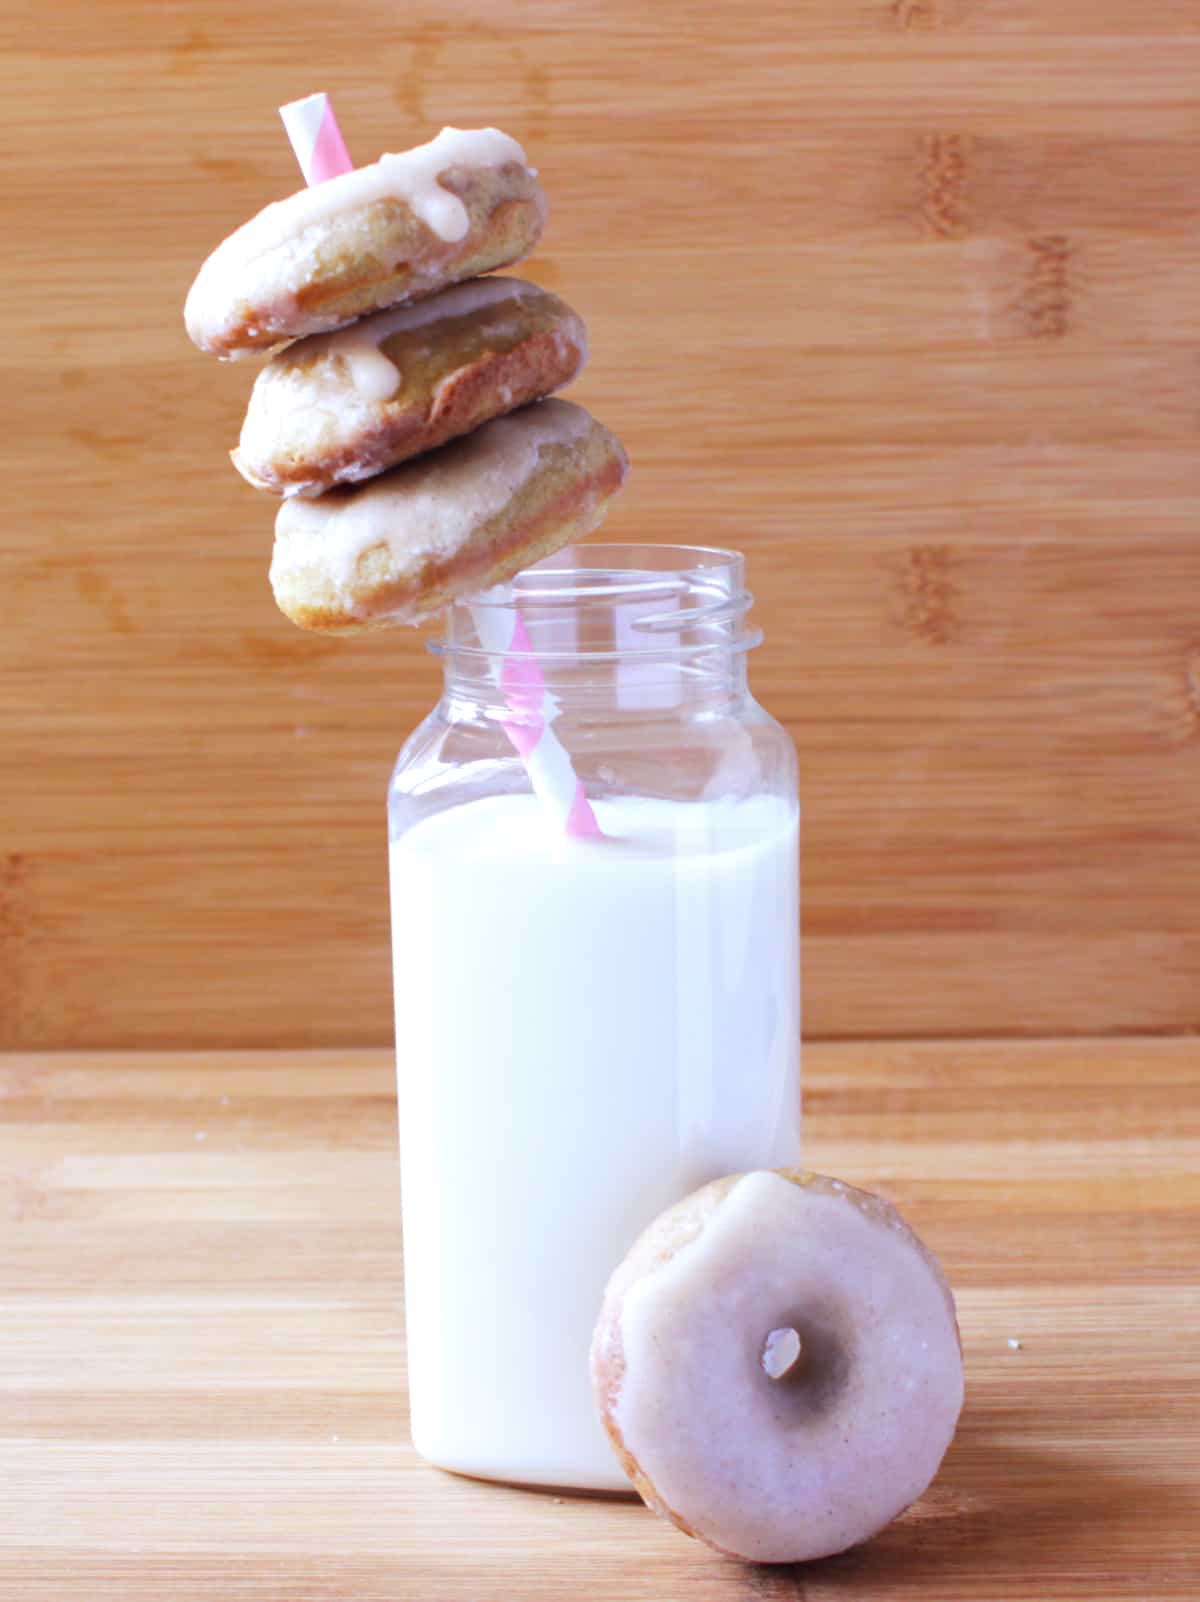 Gingerbread Doughnuts on straw over a glass of milk.